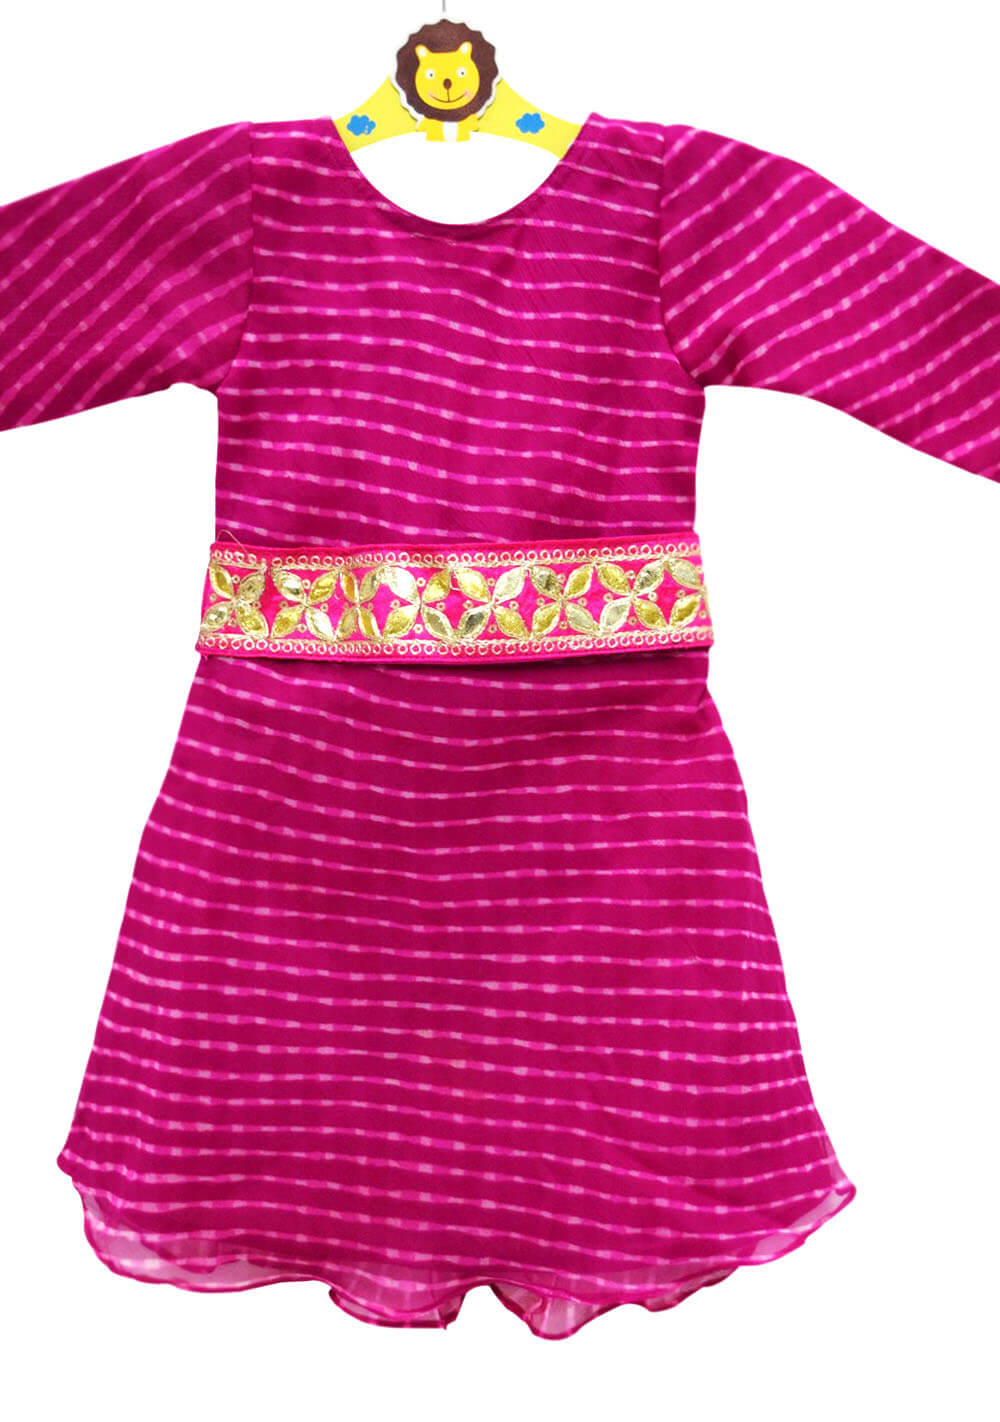 Buy Verone Cotton Beautiful Design Top for Kid Baby Girl Dress at Amazon.in